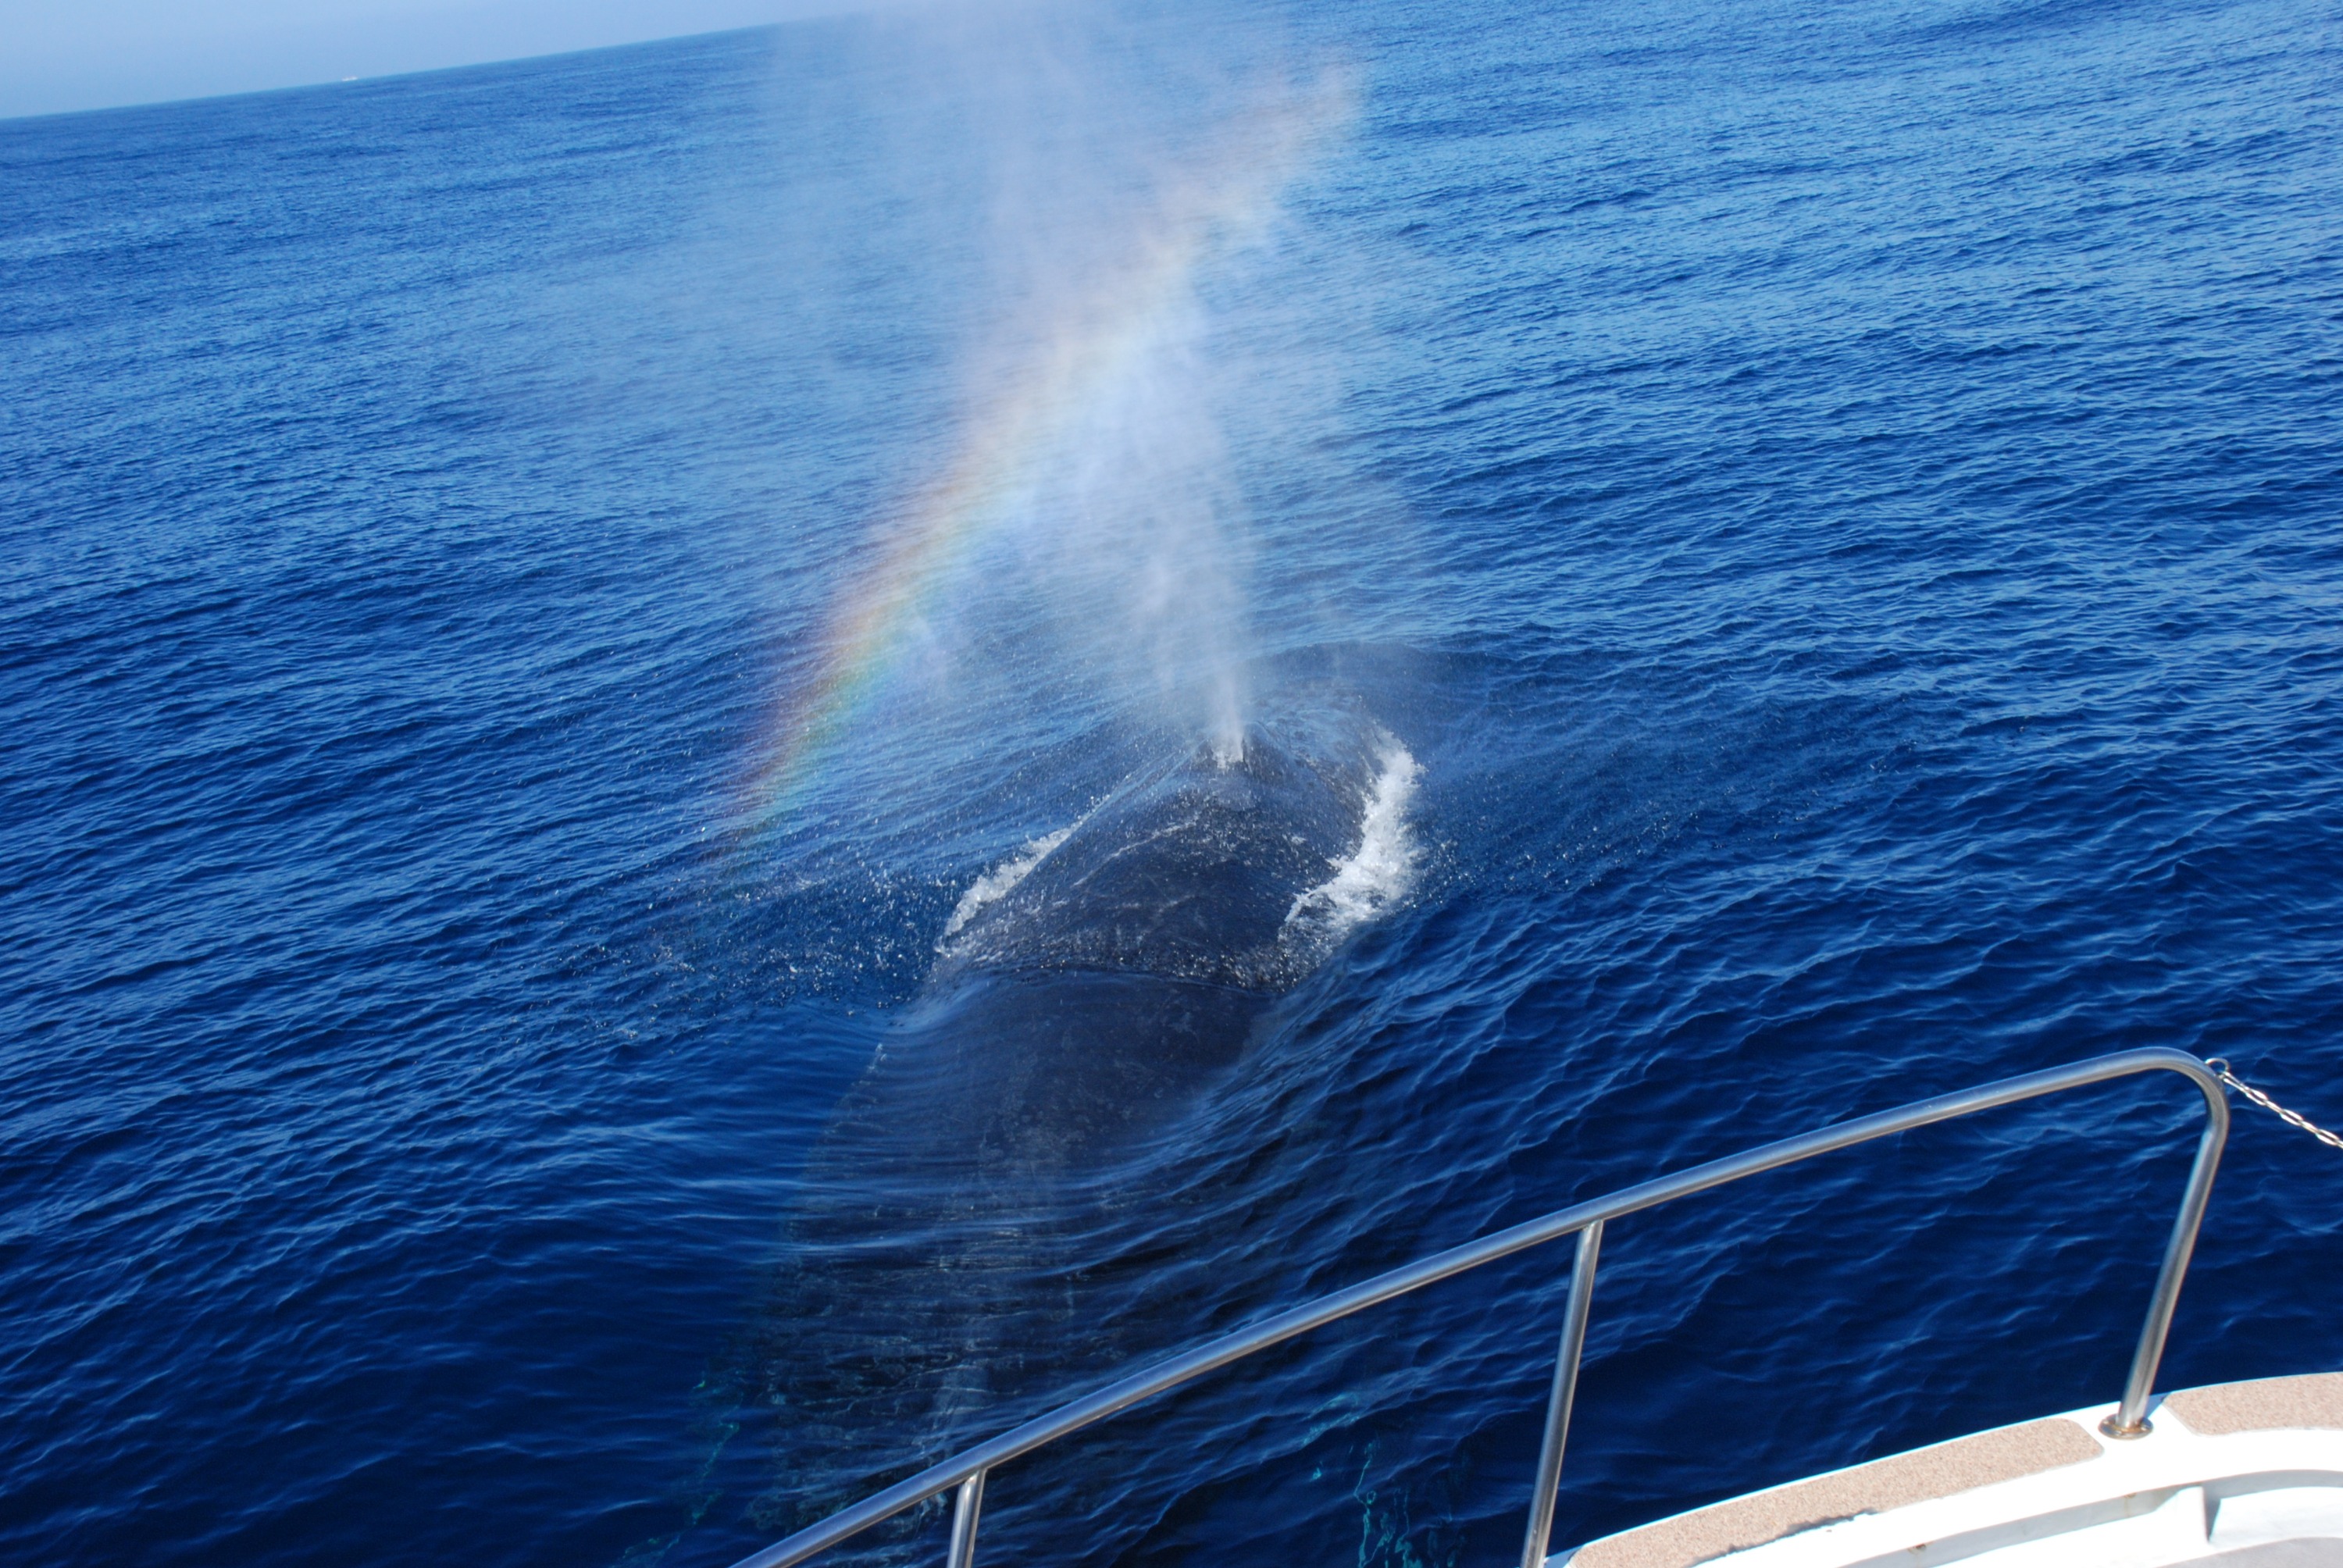  Whale Watching in Okinawa (Naha Departure)